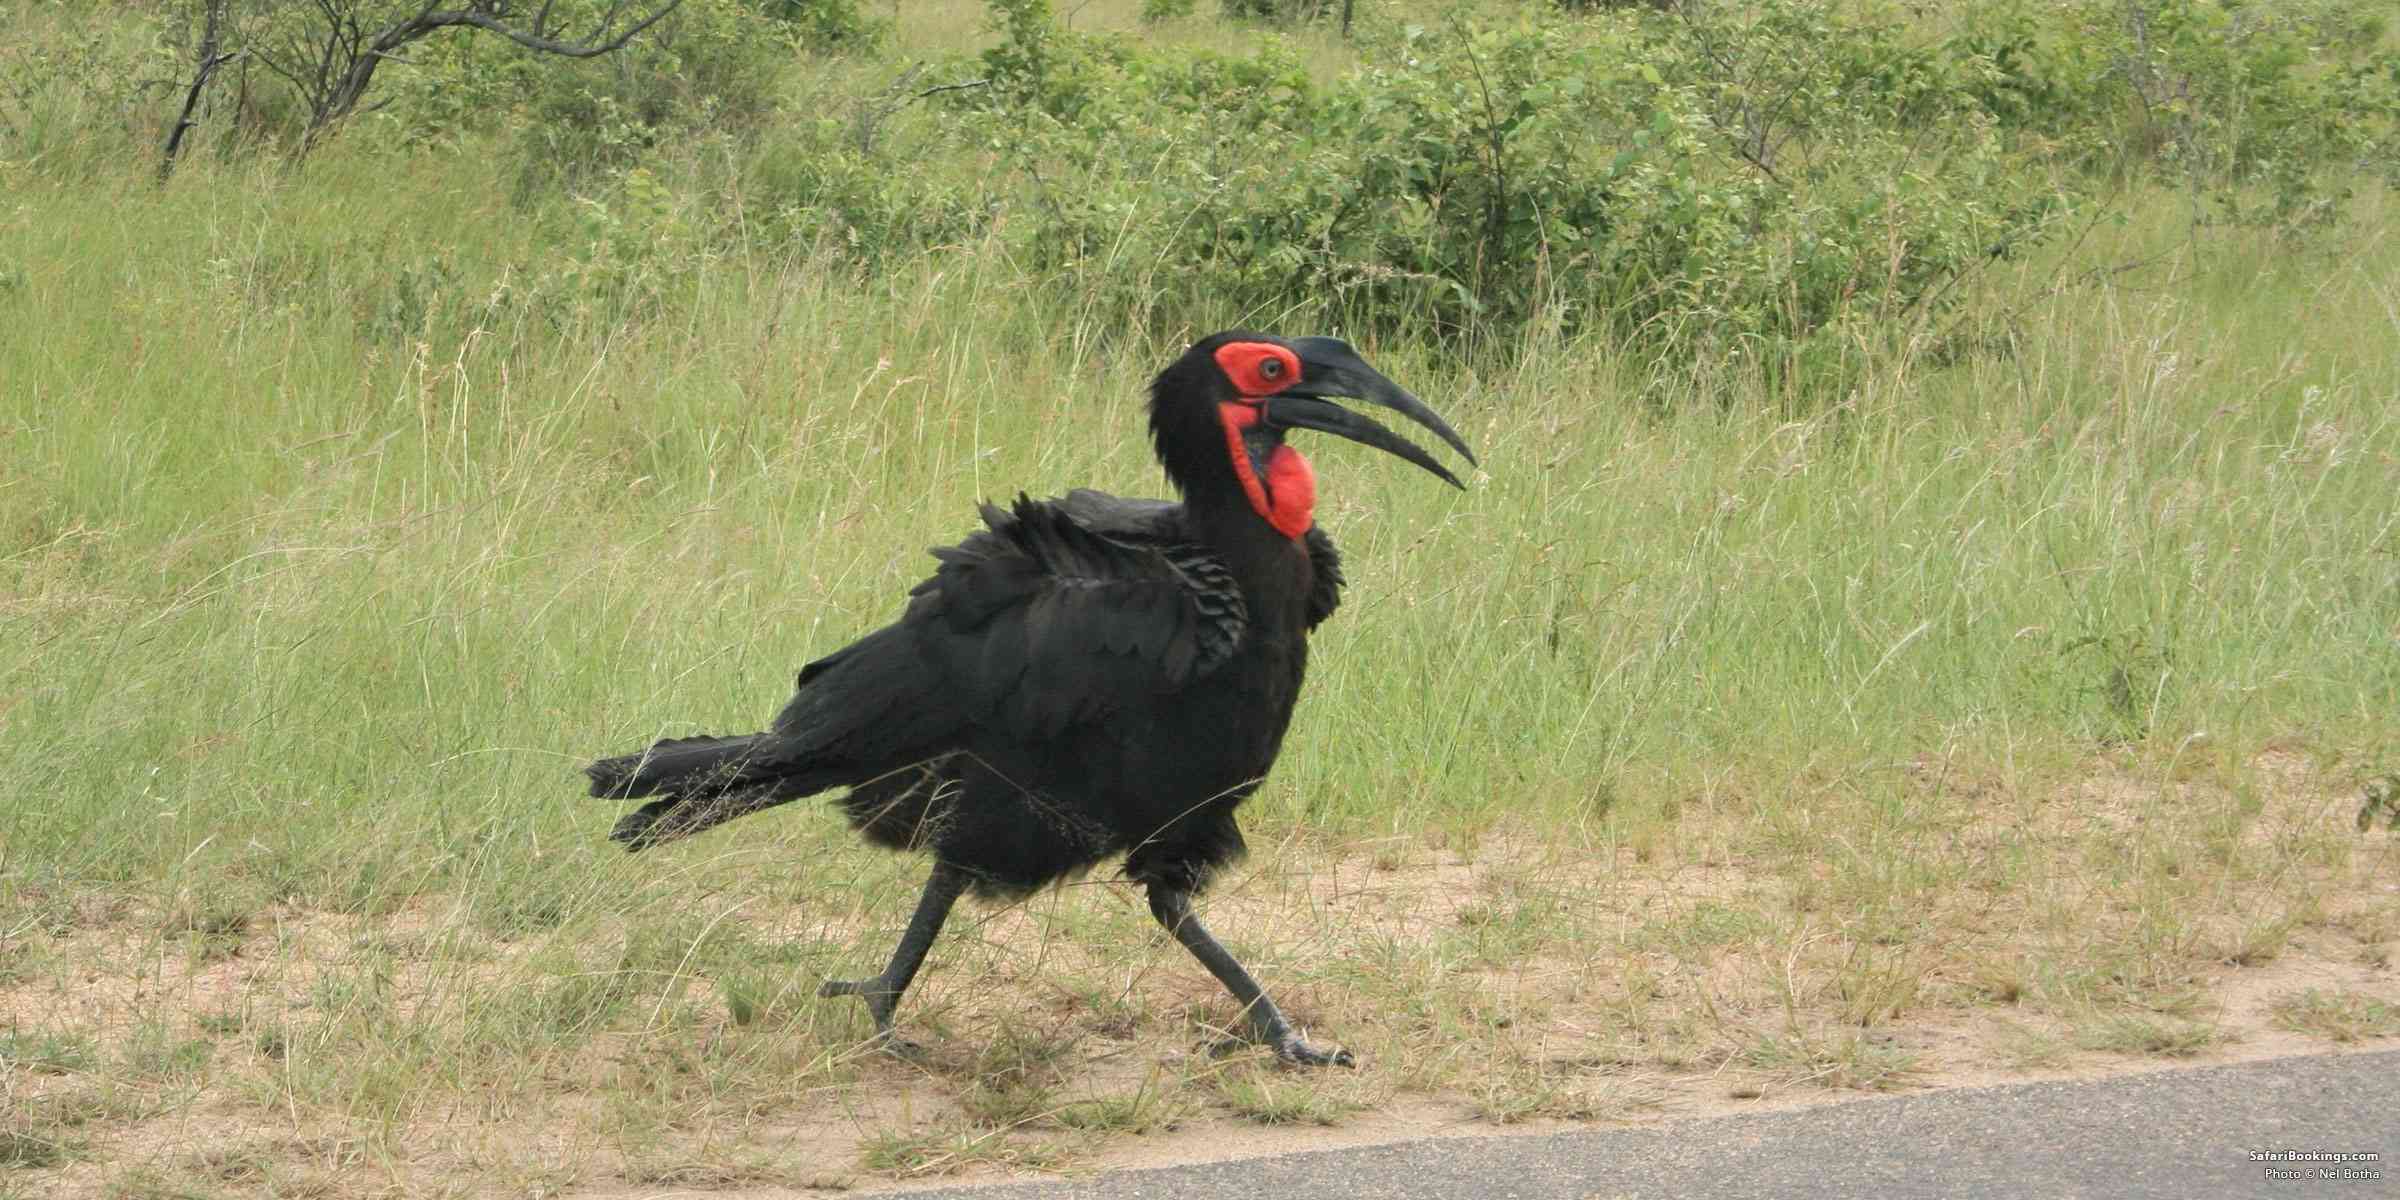 5 Fascinating Facts About the Ground Hornbill